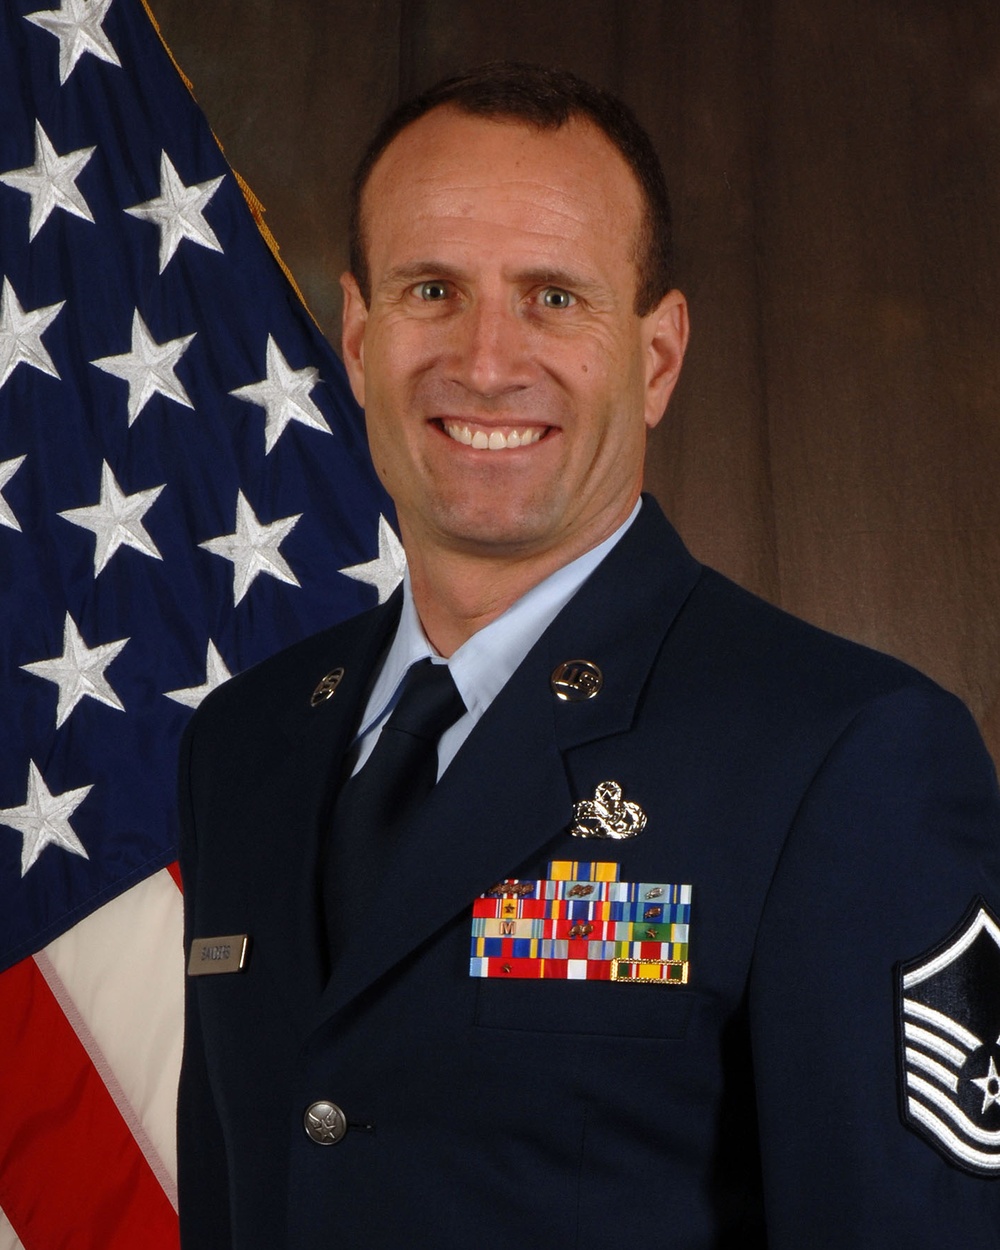 Air National Guard selects first member to serve as Academy Military Trainer at the United States Air Force Academy under the Developmental Duty Program